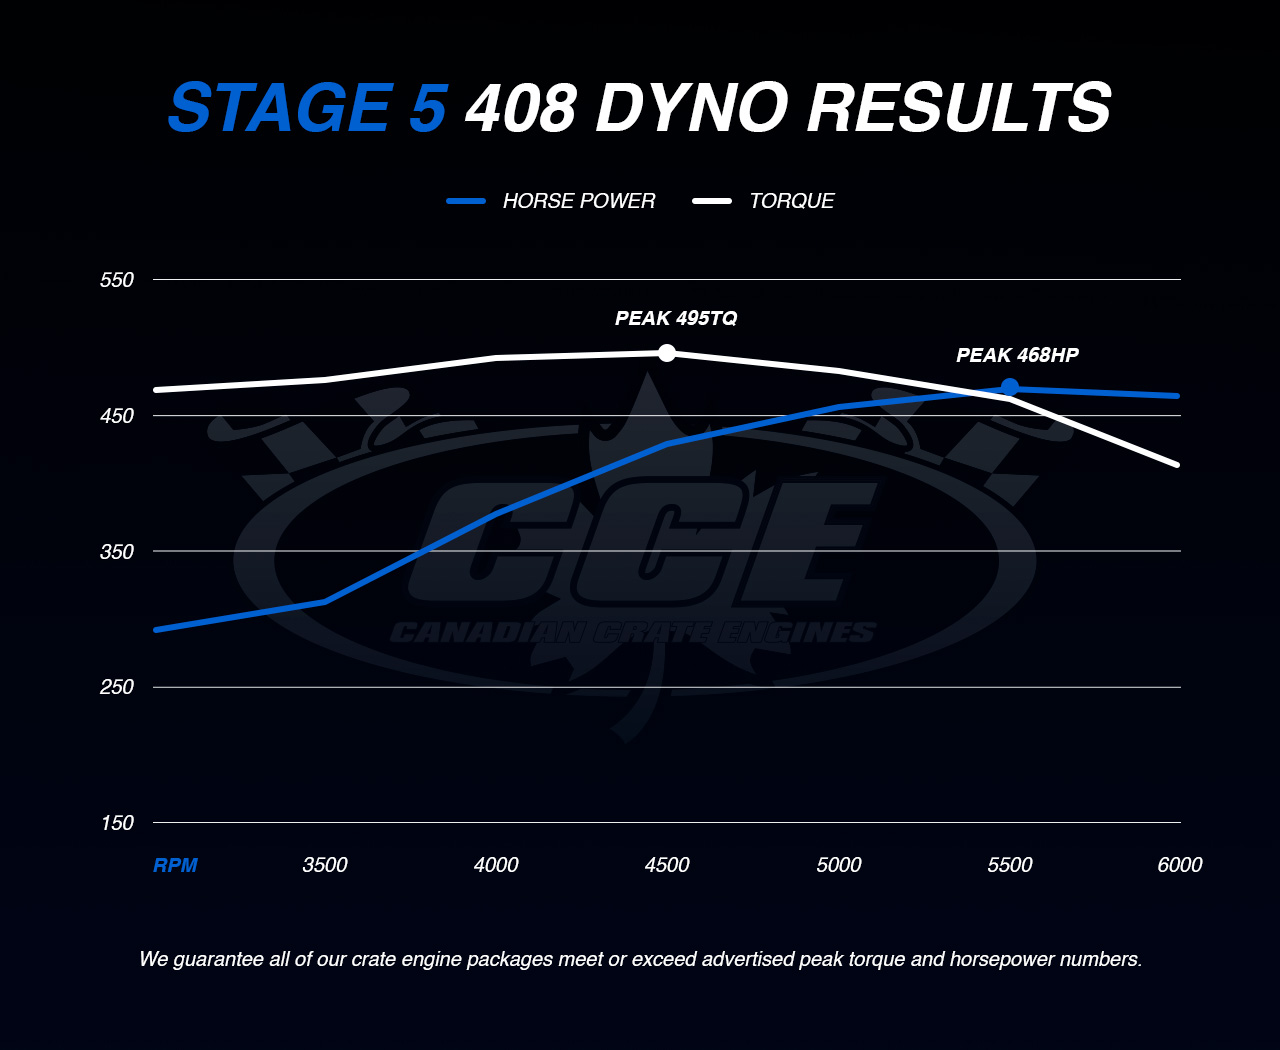 Dyno Graph Results for Ford Stage 5 showing peak torque of 495TQ and peak horsepower of 468HP